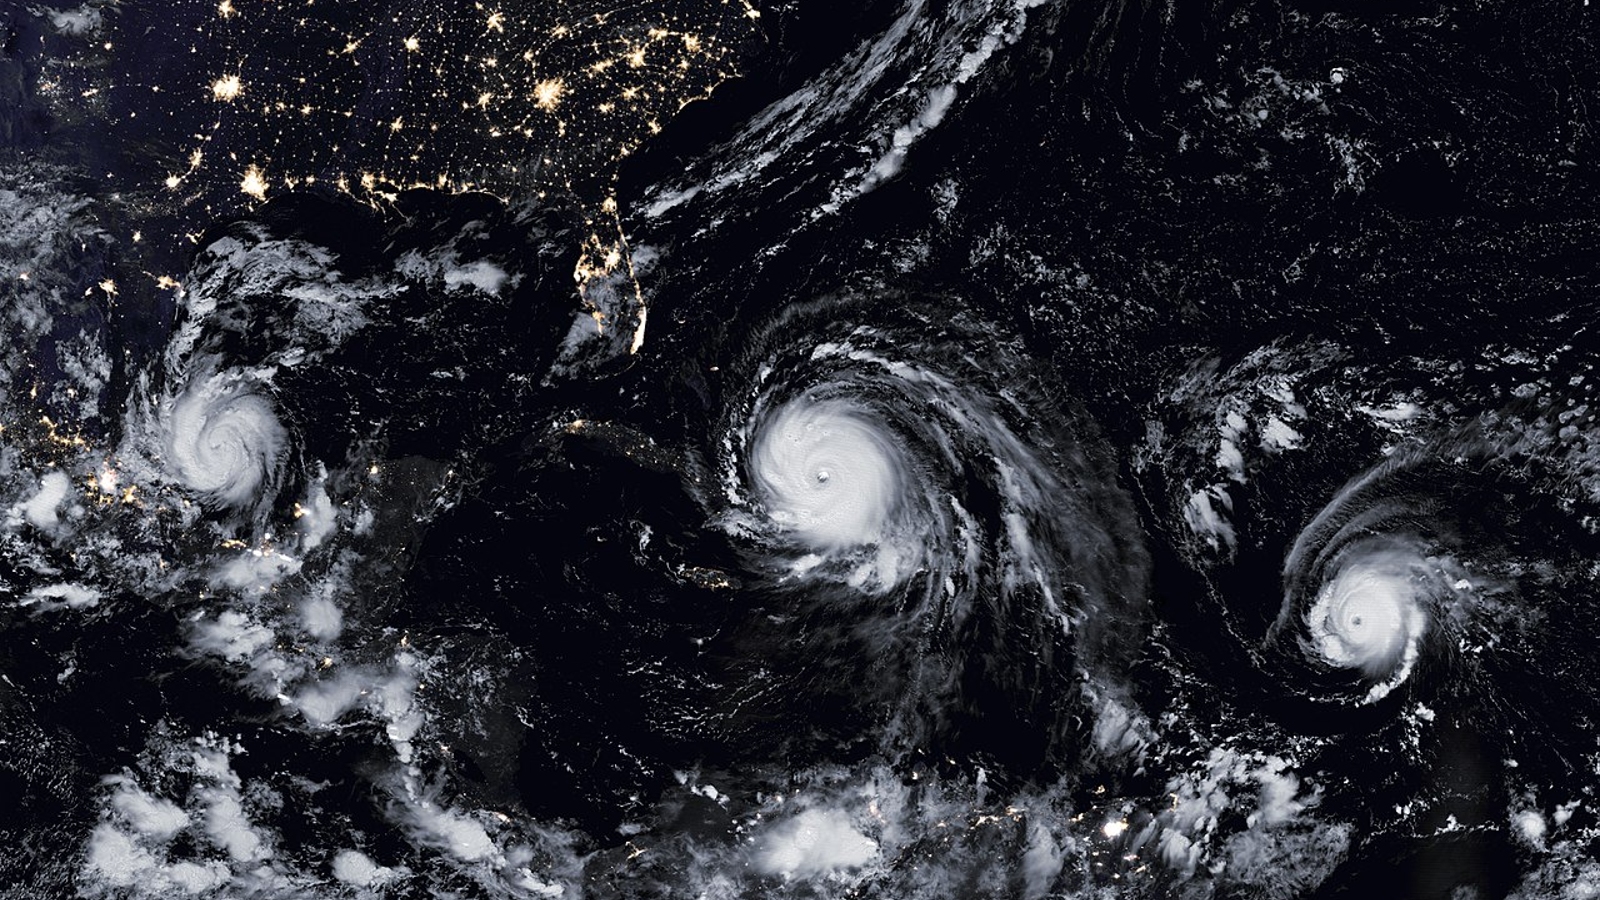  Earth from space: 3 hurricanes form a perfect line before smashing into land 